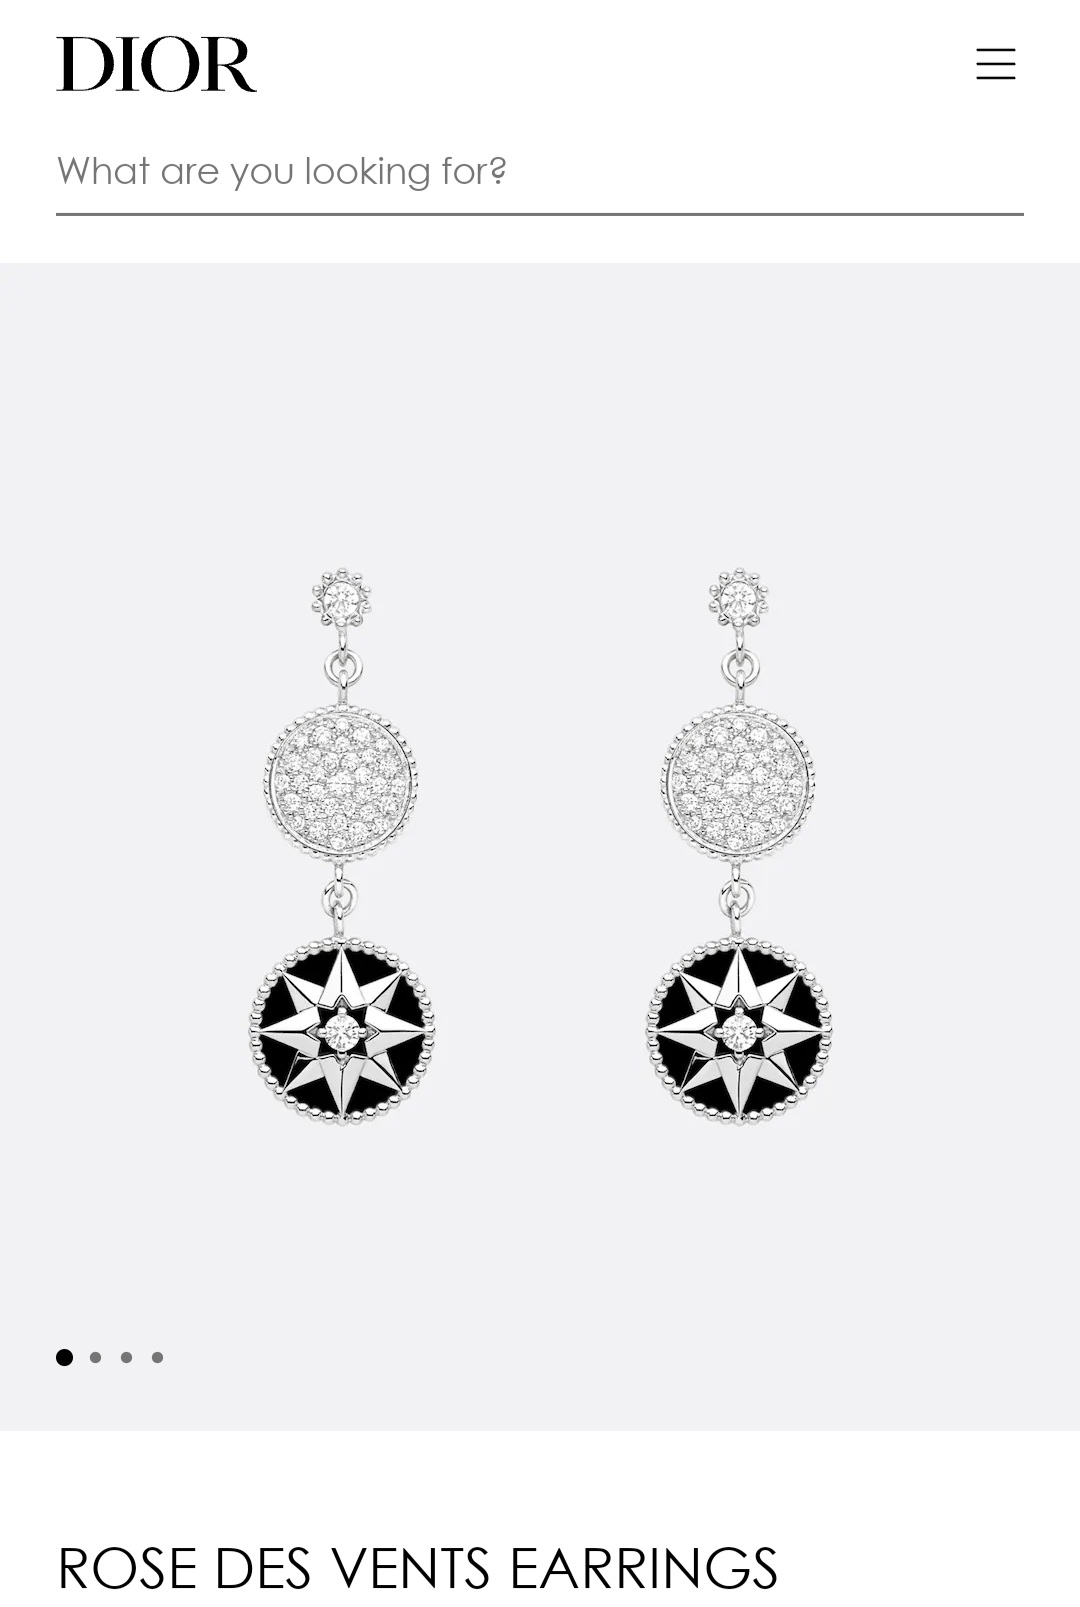 DIOR ROSE DES VENTS EARRINGS